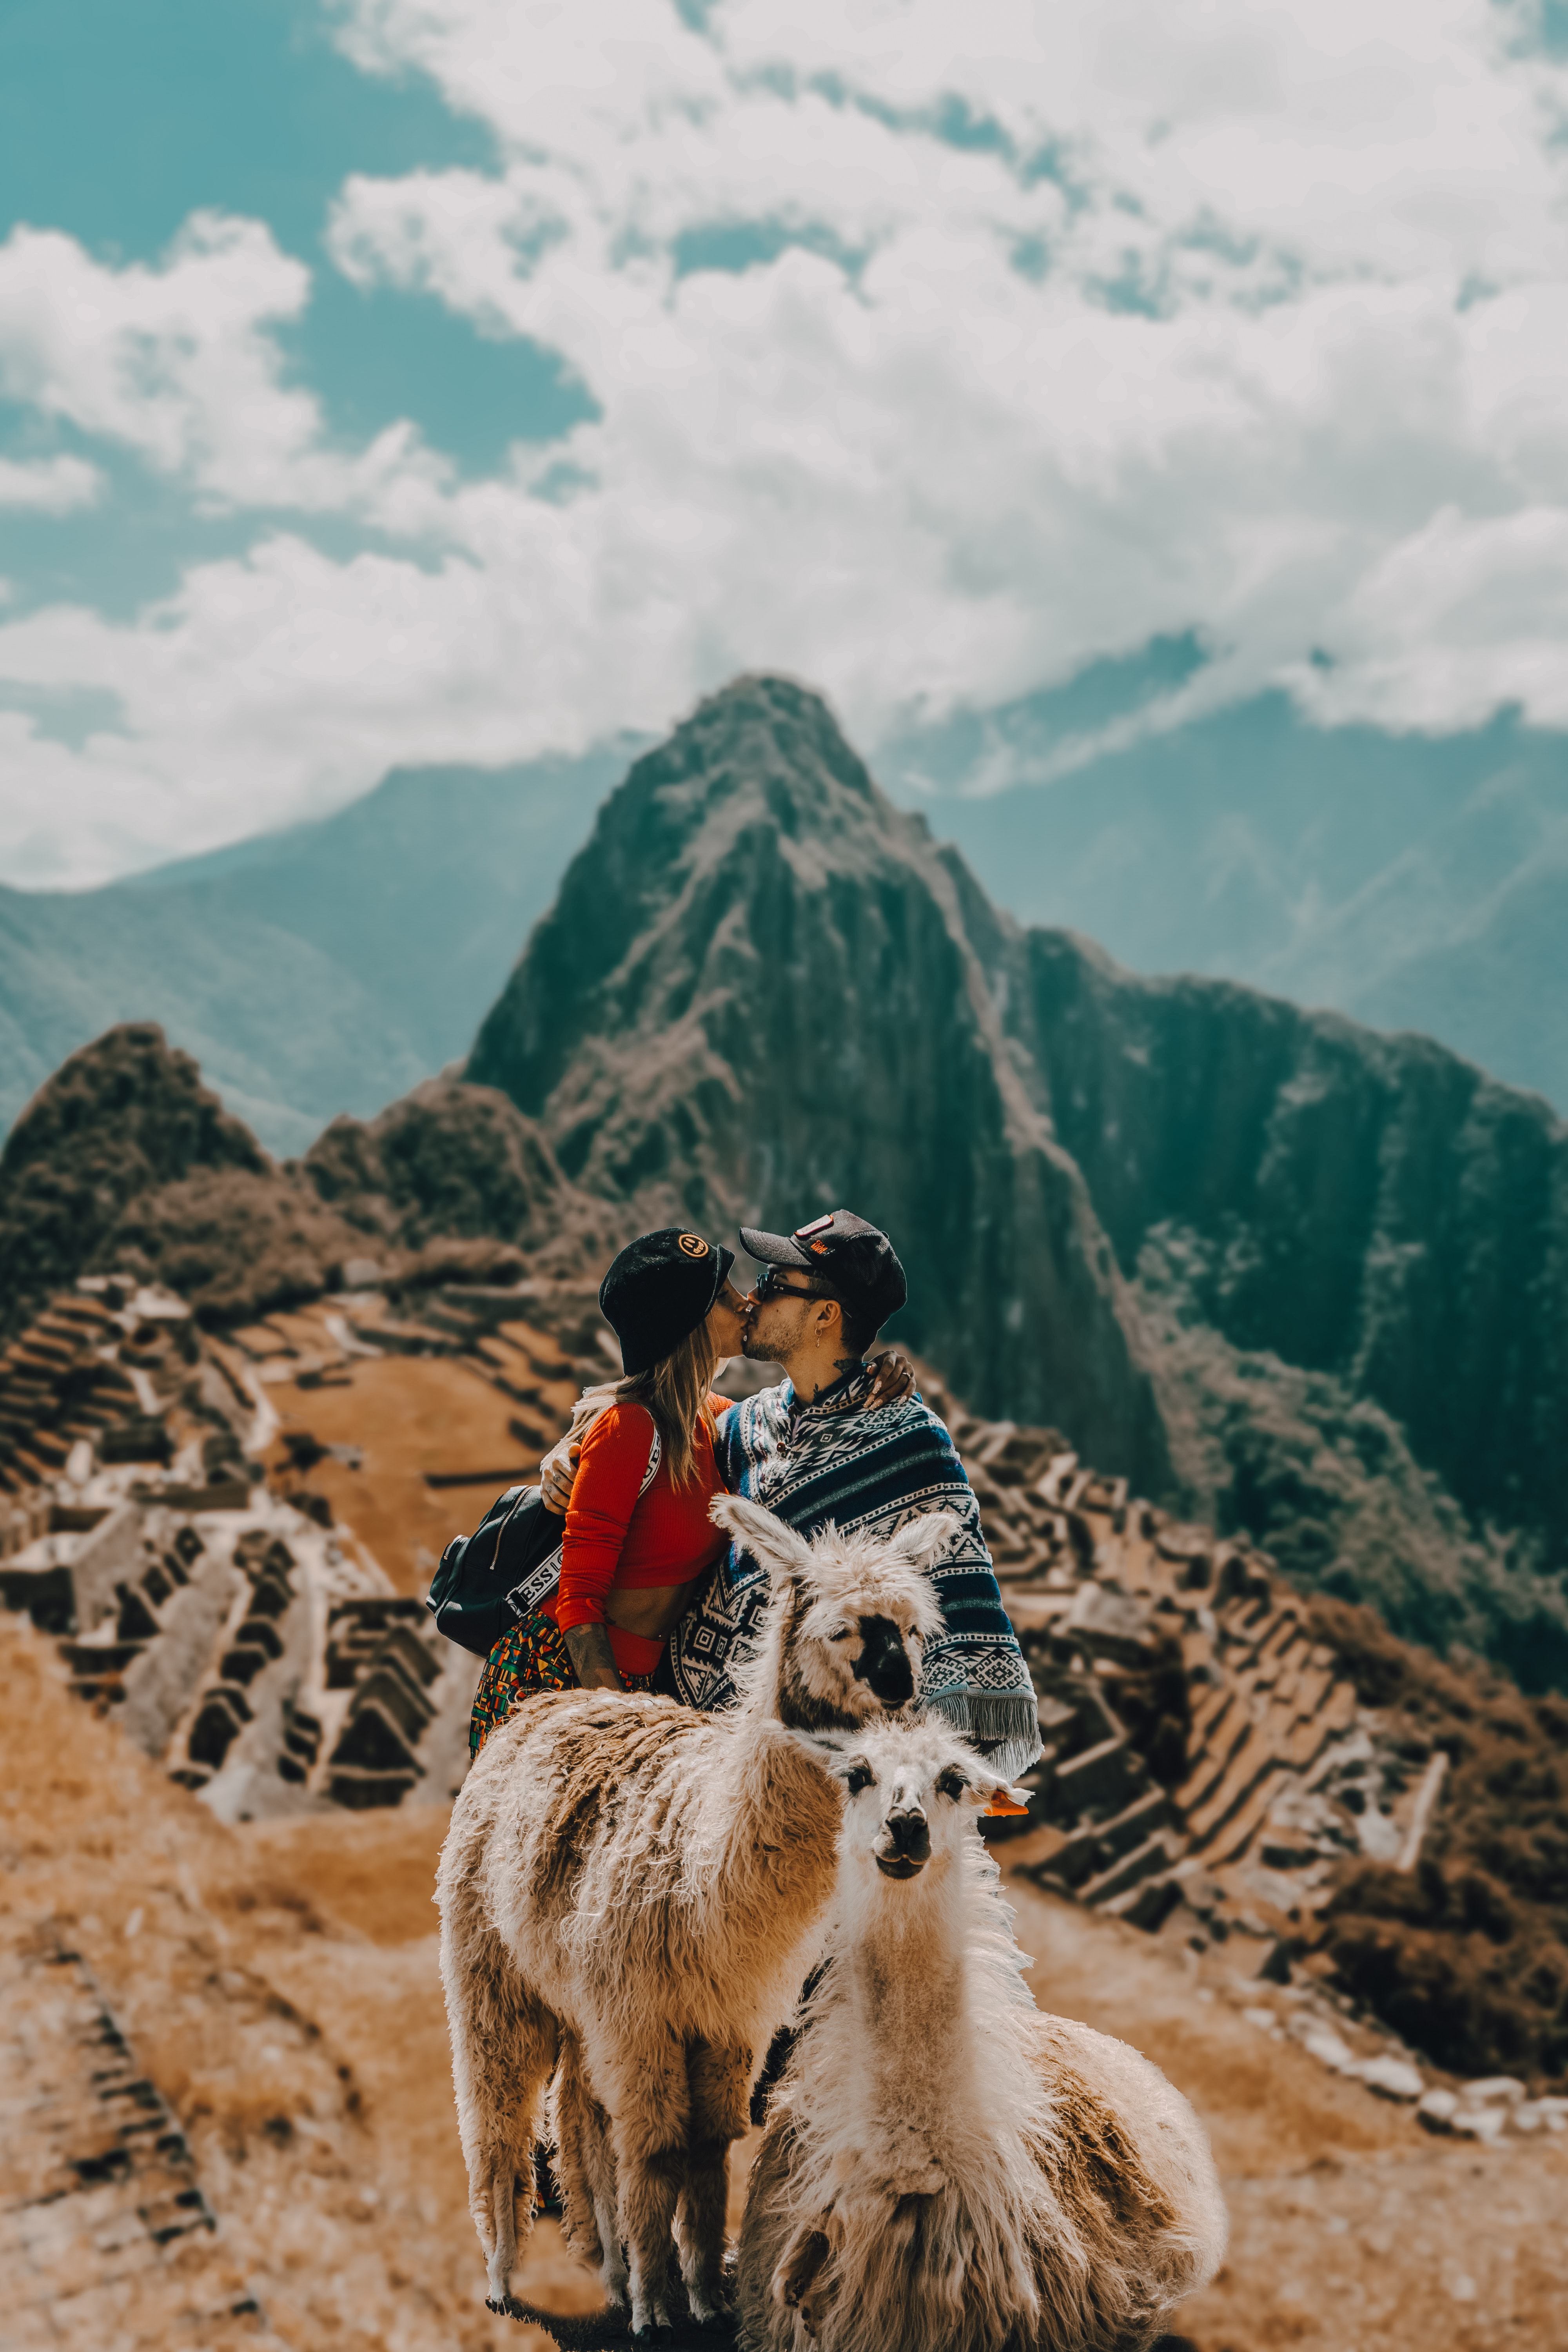 A couple kissing in front of Machu Pichu. | Source: Pexels